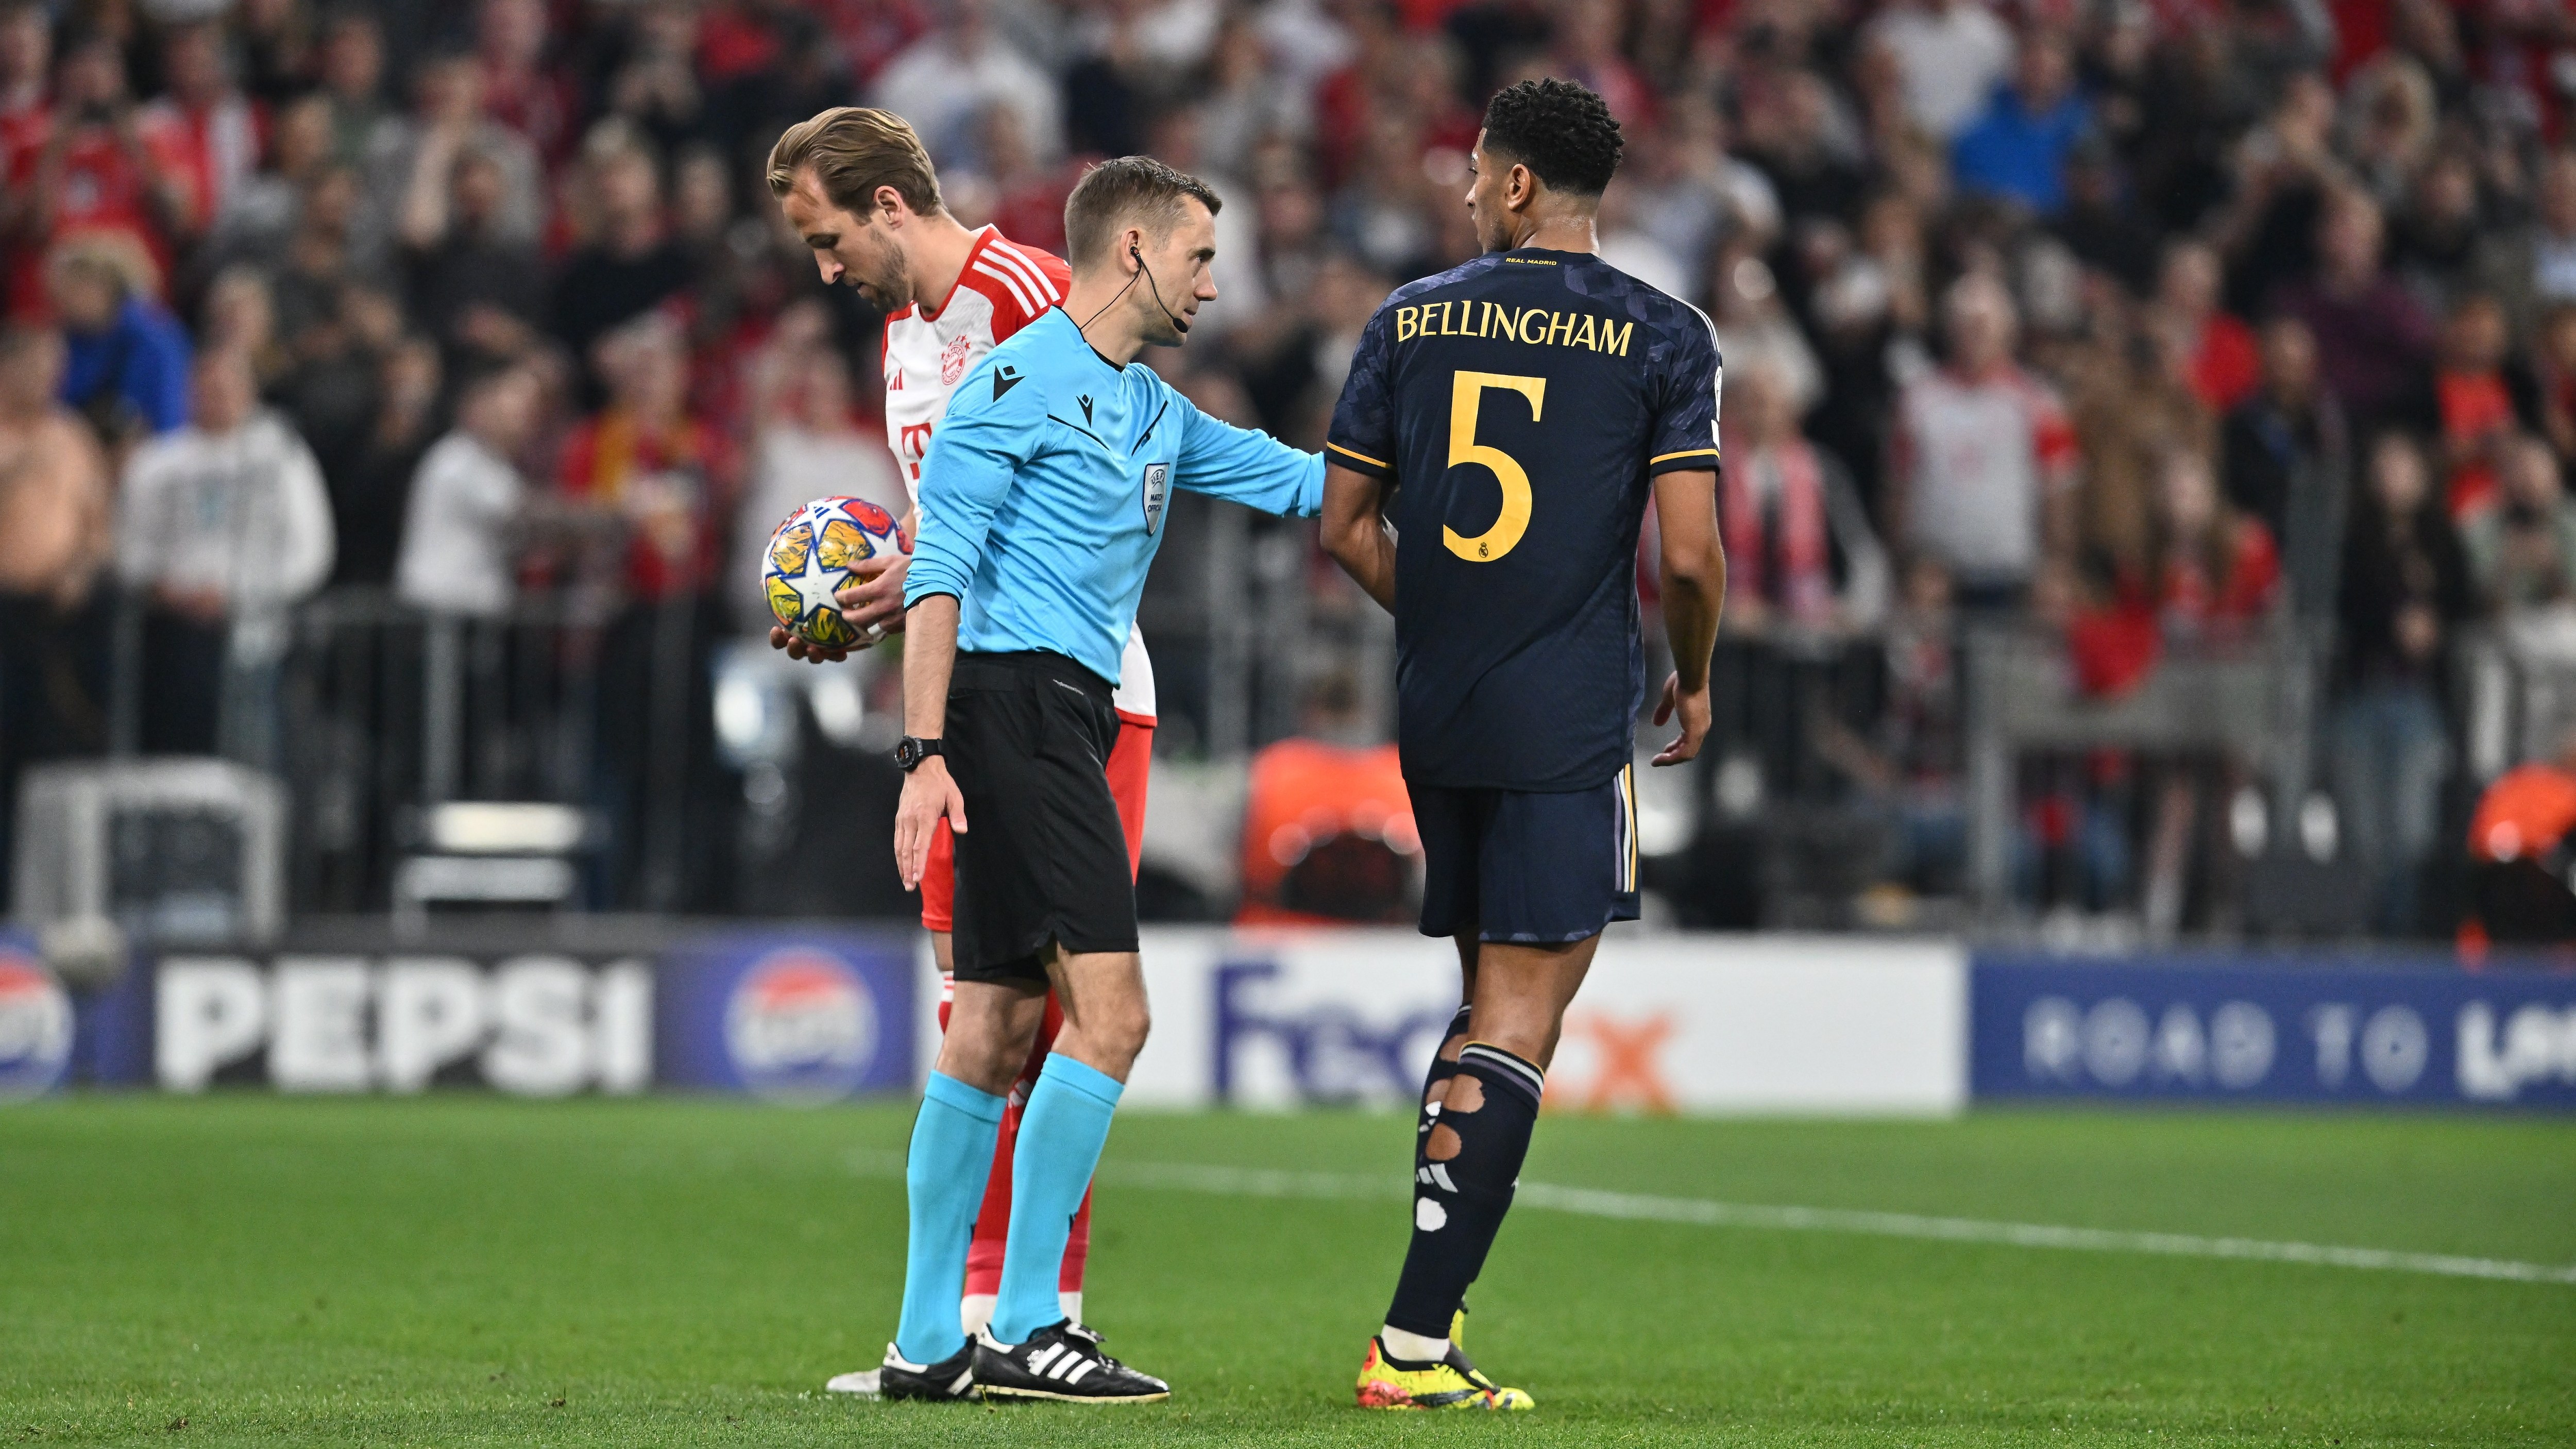 Bellingham is instructed to move away by the referee as Kane shrugs off the distraction in the first leg of the Champions League semi-final